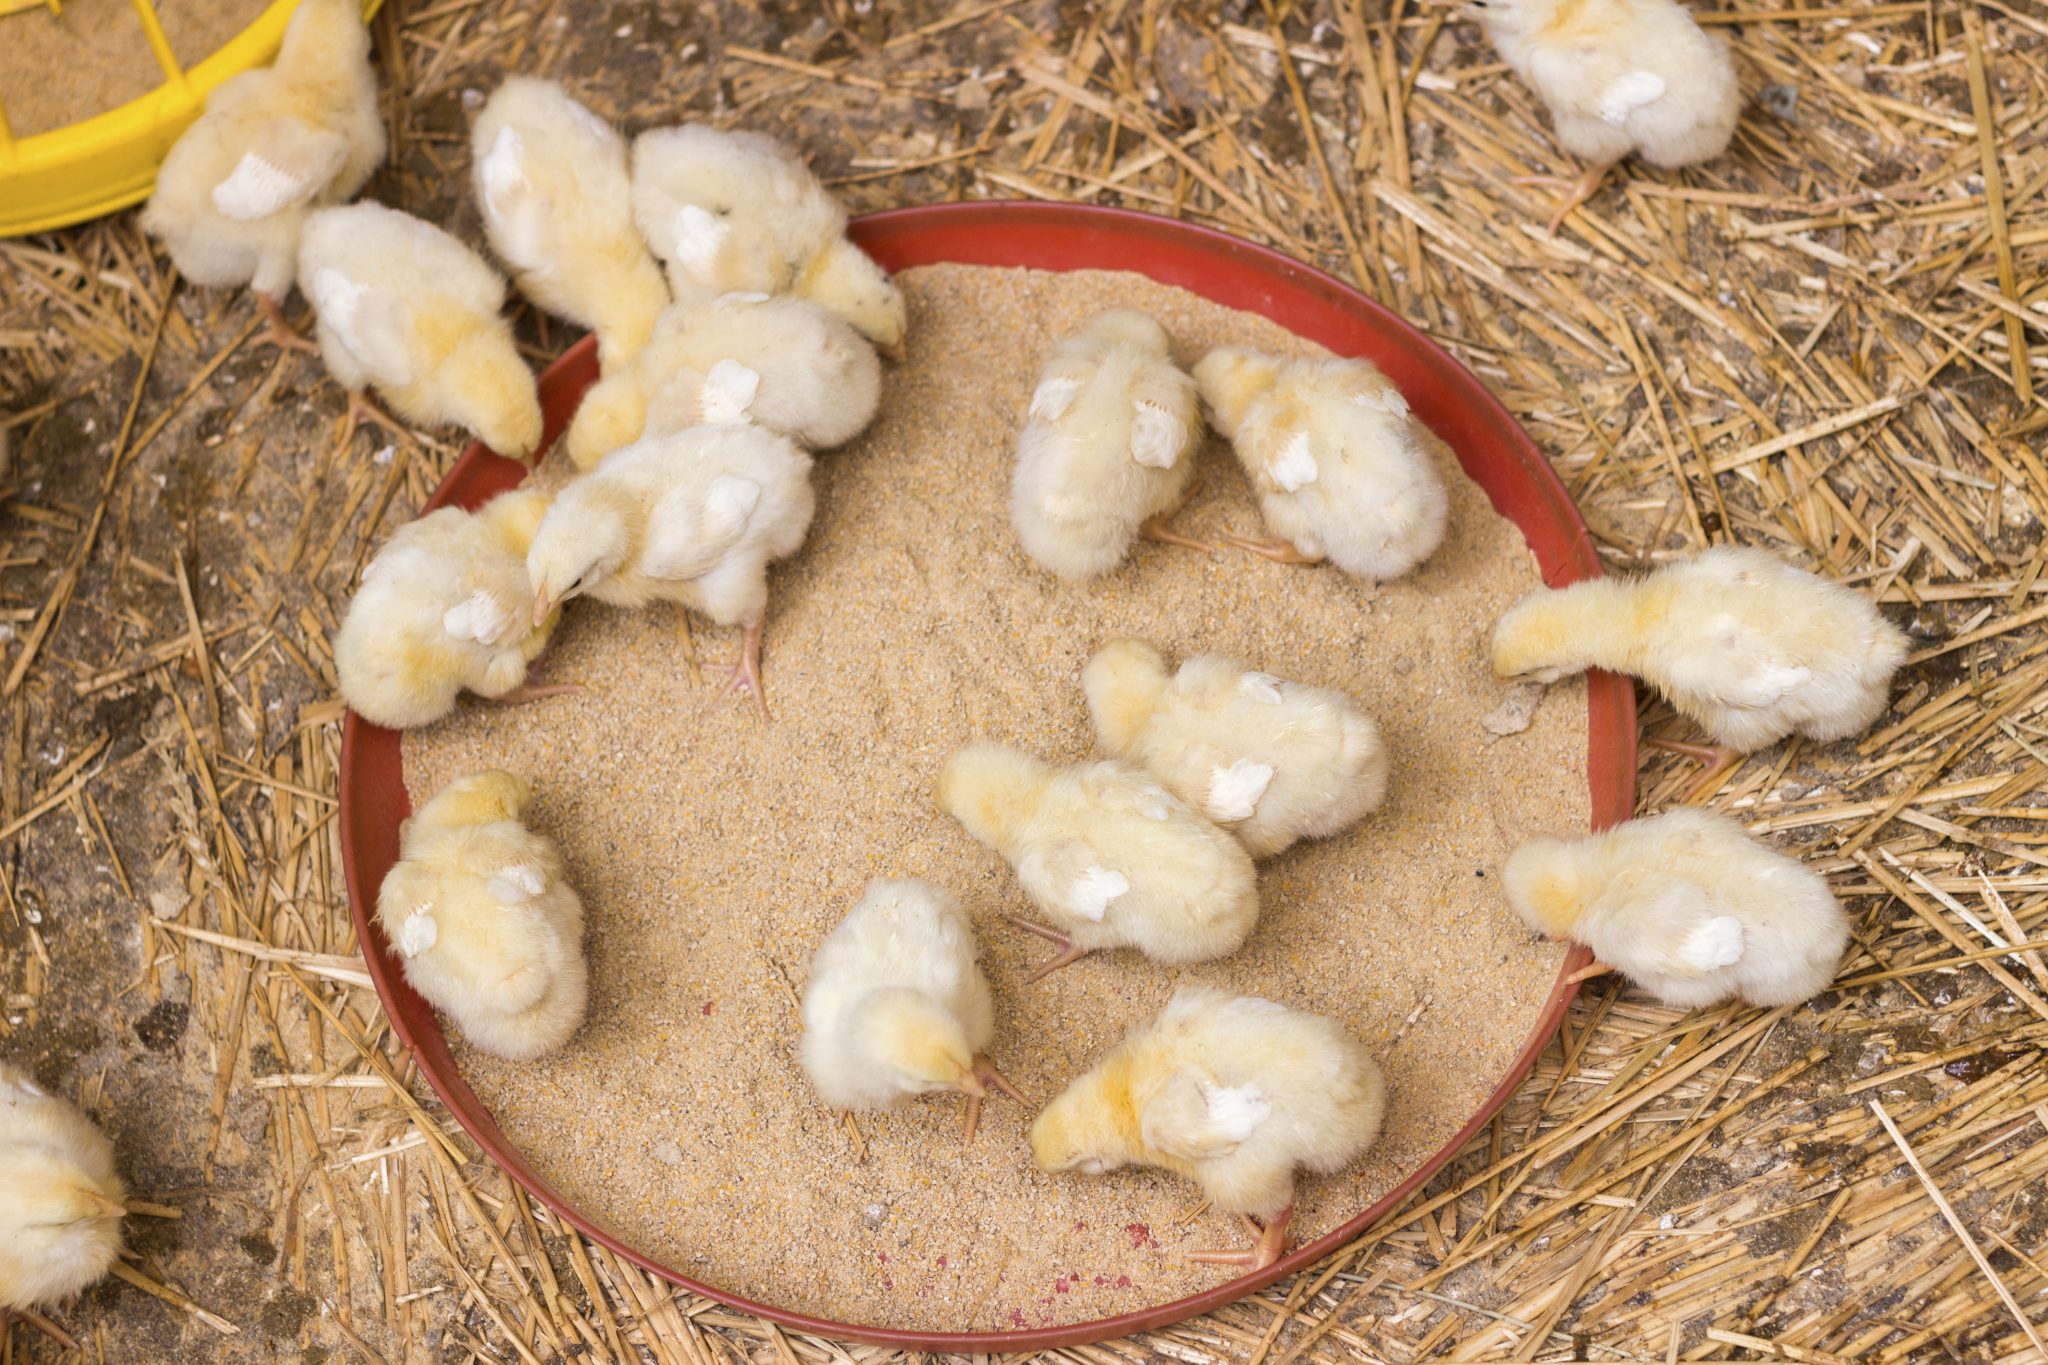 Baby chickens being fed on a chicken farm, overhead view